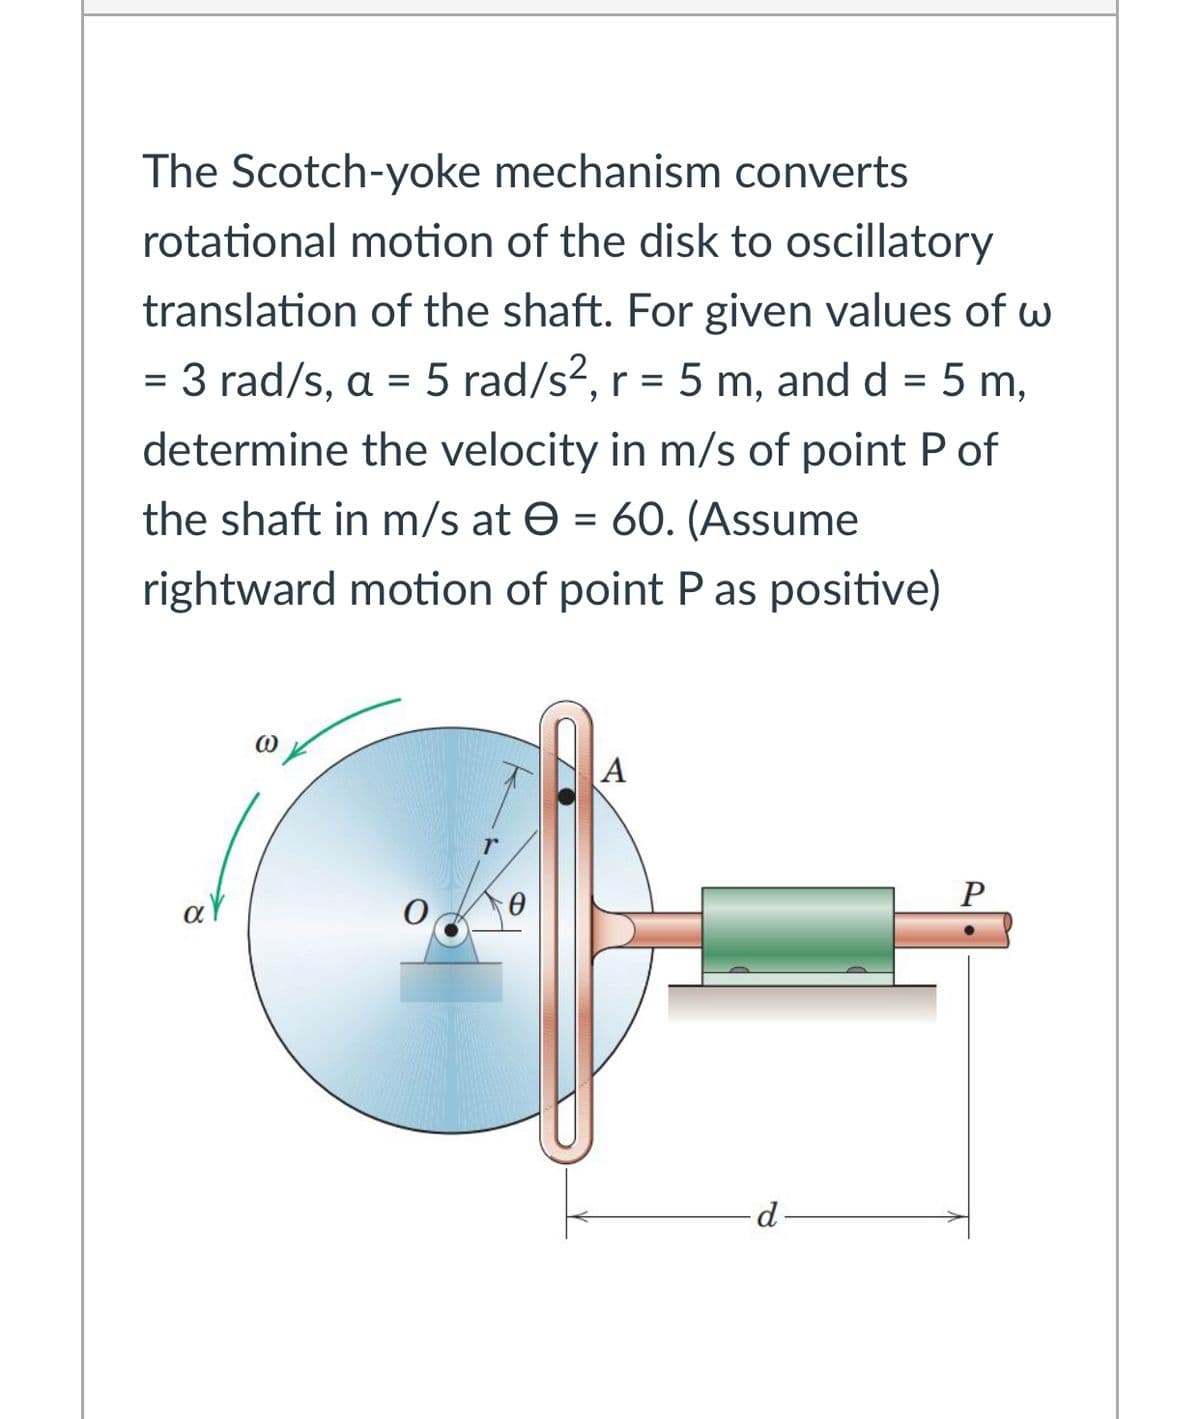 The Scotch-yoke mechanism converts
rotational motion of the disk to oscillatory
translation of the shaft. For given values of w
3 rad/s, a = 5 rad/s2, r = 5 m, and d = 5 m,
determine the velocity in m/s of point P of
the shaft in m/s at e = 60. (Assume
rightward motion of point P as positive)
P
aY
d
